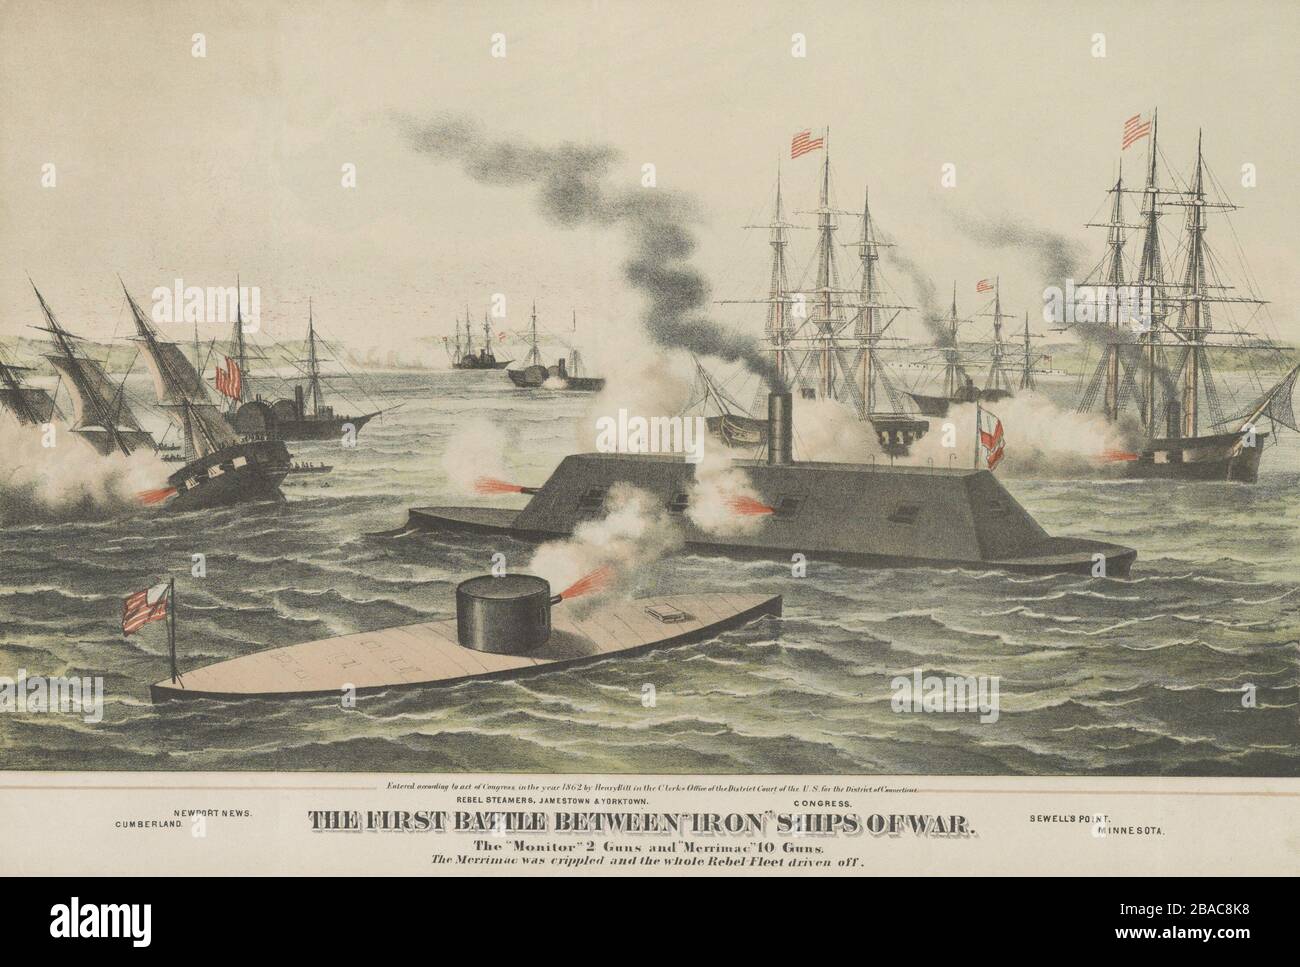 US Civil War, Battle of Hampton Roads, on March 9, 1862, the first engagement between ironclad gunboats. USS Monitor and CSS Virginia (formerly the USS Merrimac) are engaged in combat, with other ships nearby. At left is the USS Cumberland, sinking, an event that took place on March 8th, the day previous to the ironclad battle at center. The USS Minnesota at far right, was engaged in the ironclad battle of March 9th  (BSLOC 2018 8 19) Stock Photo